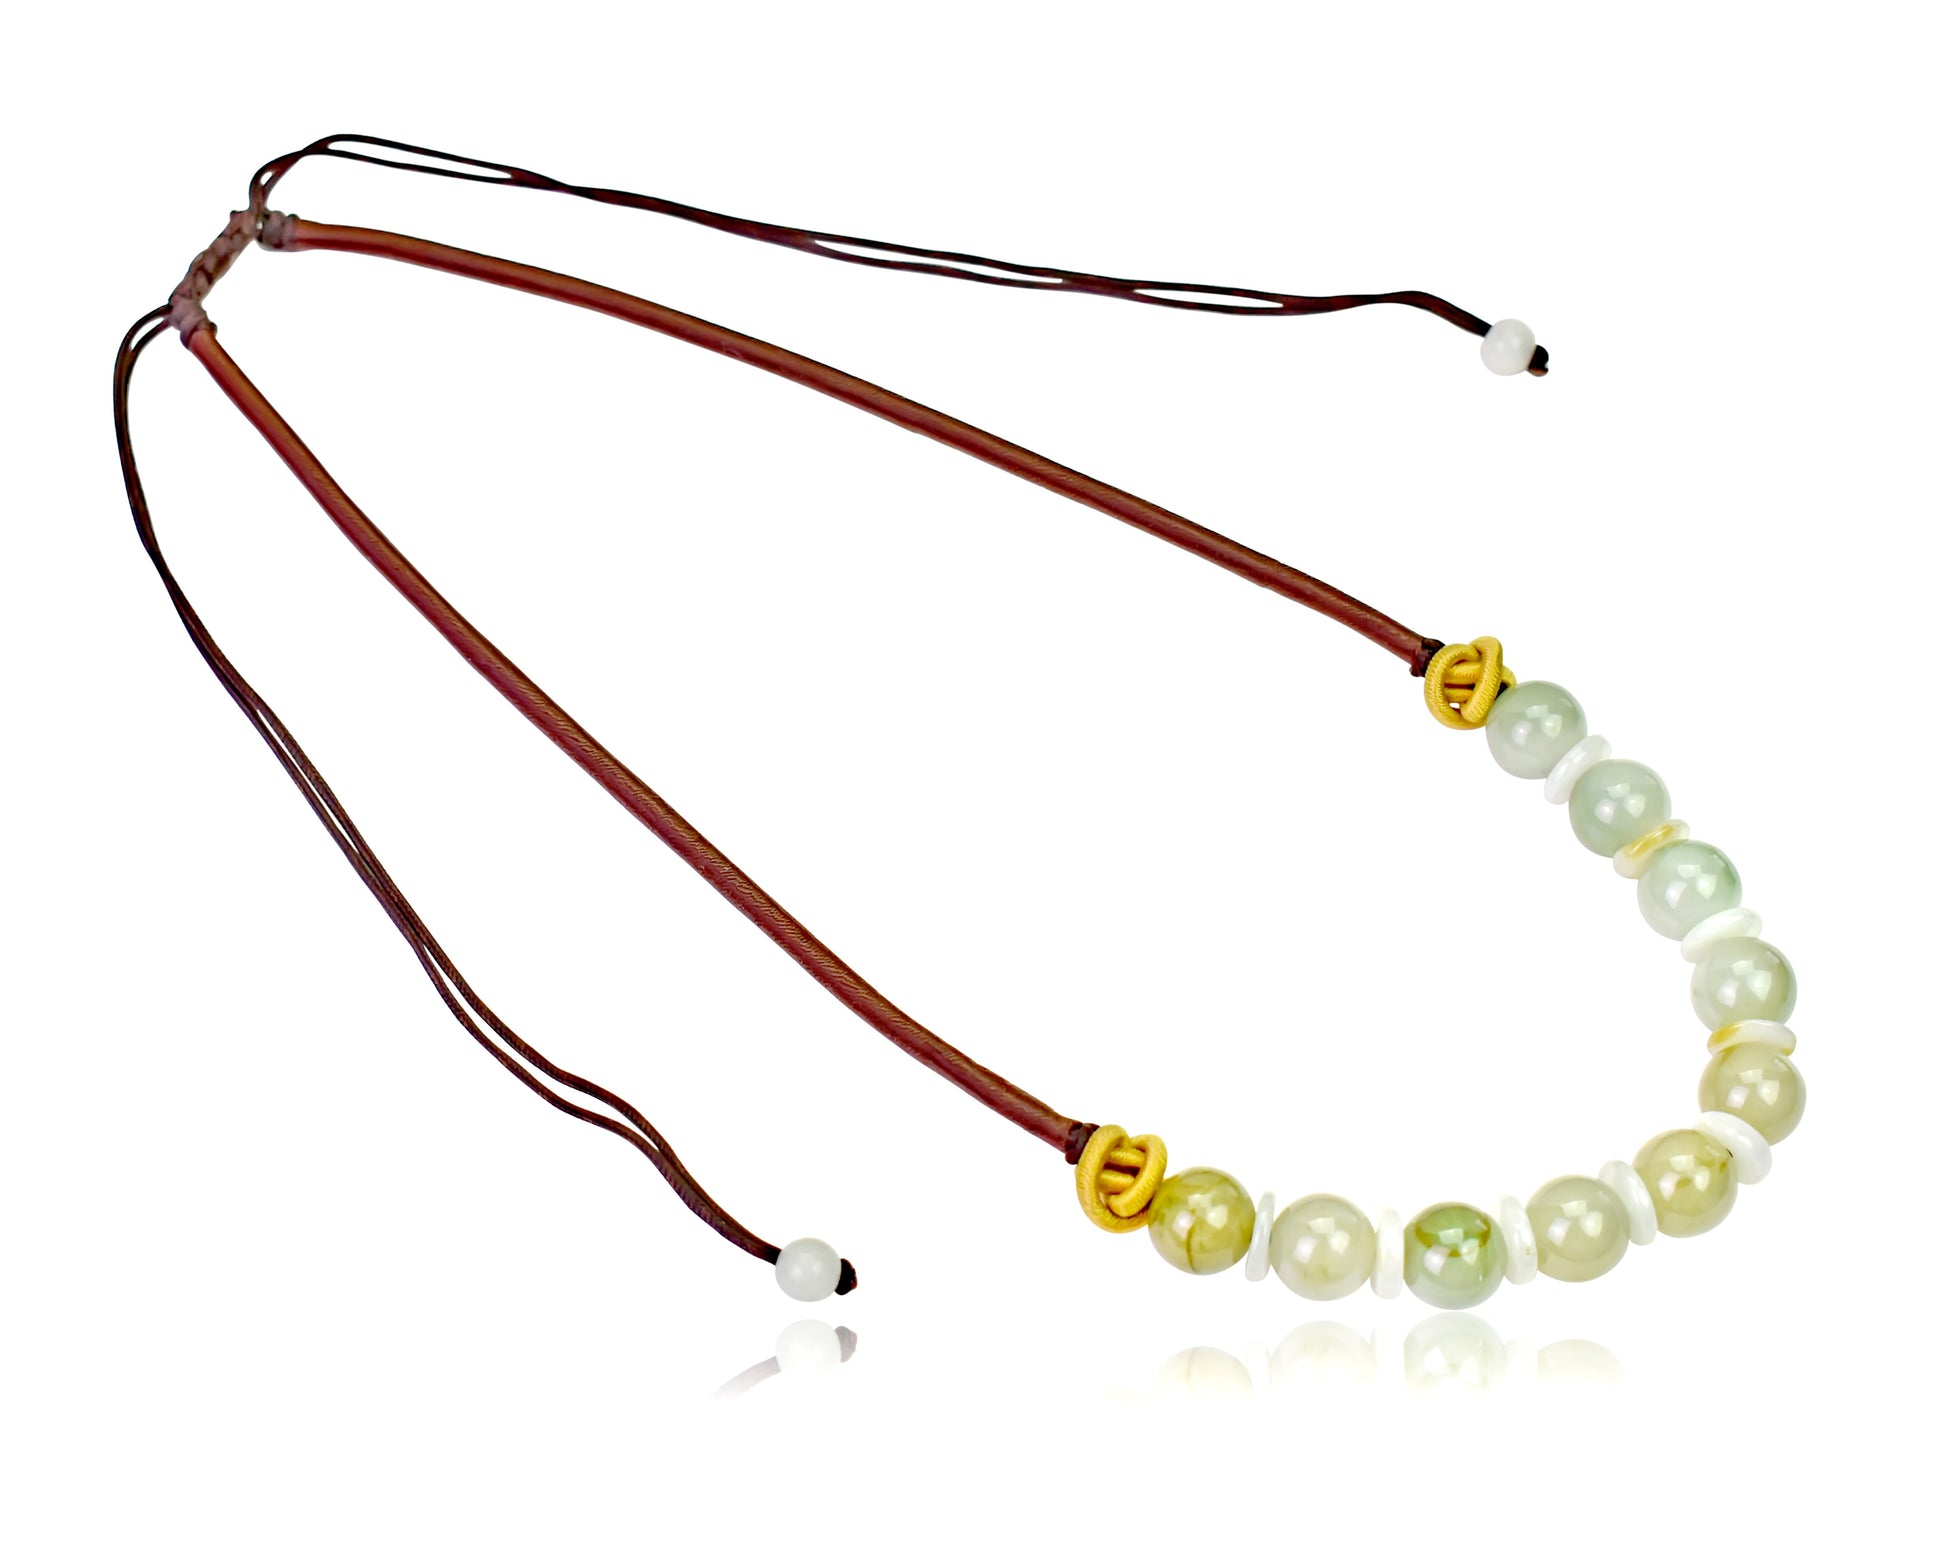 Get Closer to Nature with the PI Symbol and Jade Beads Necklace made with Brown Cord